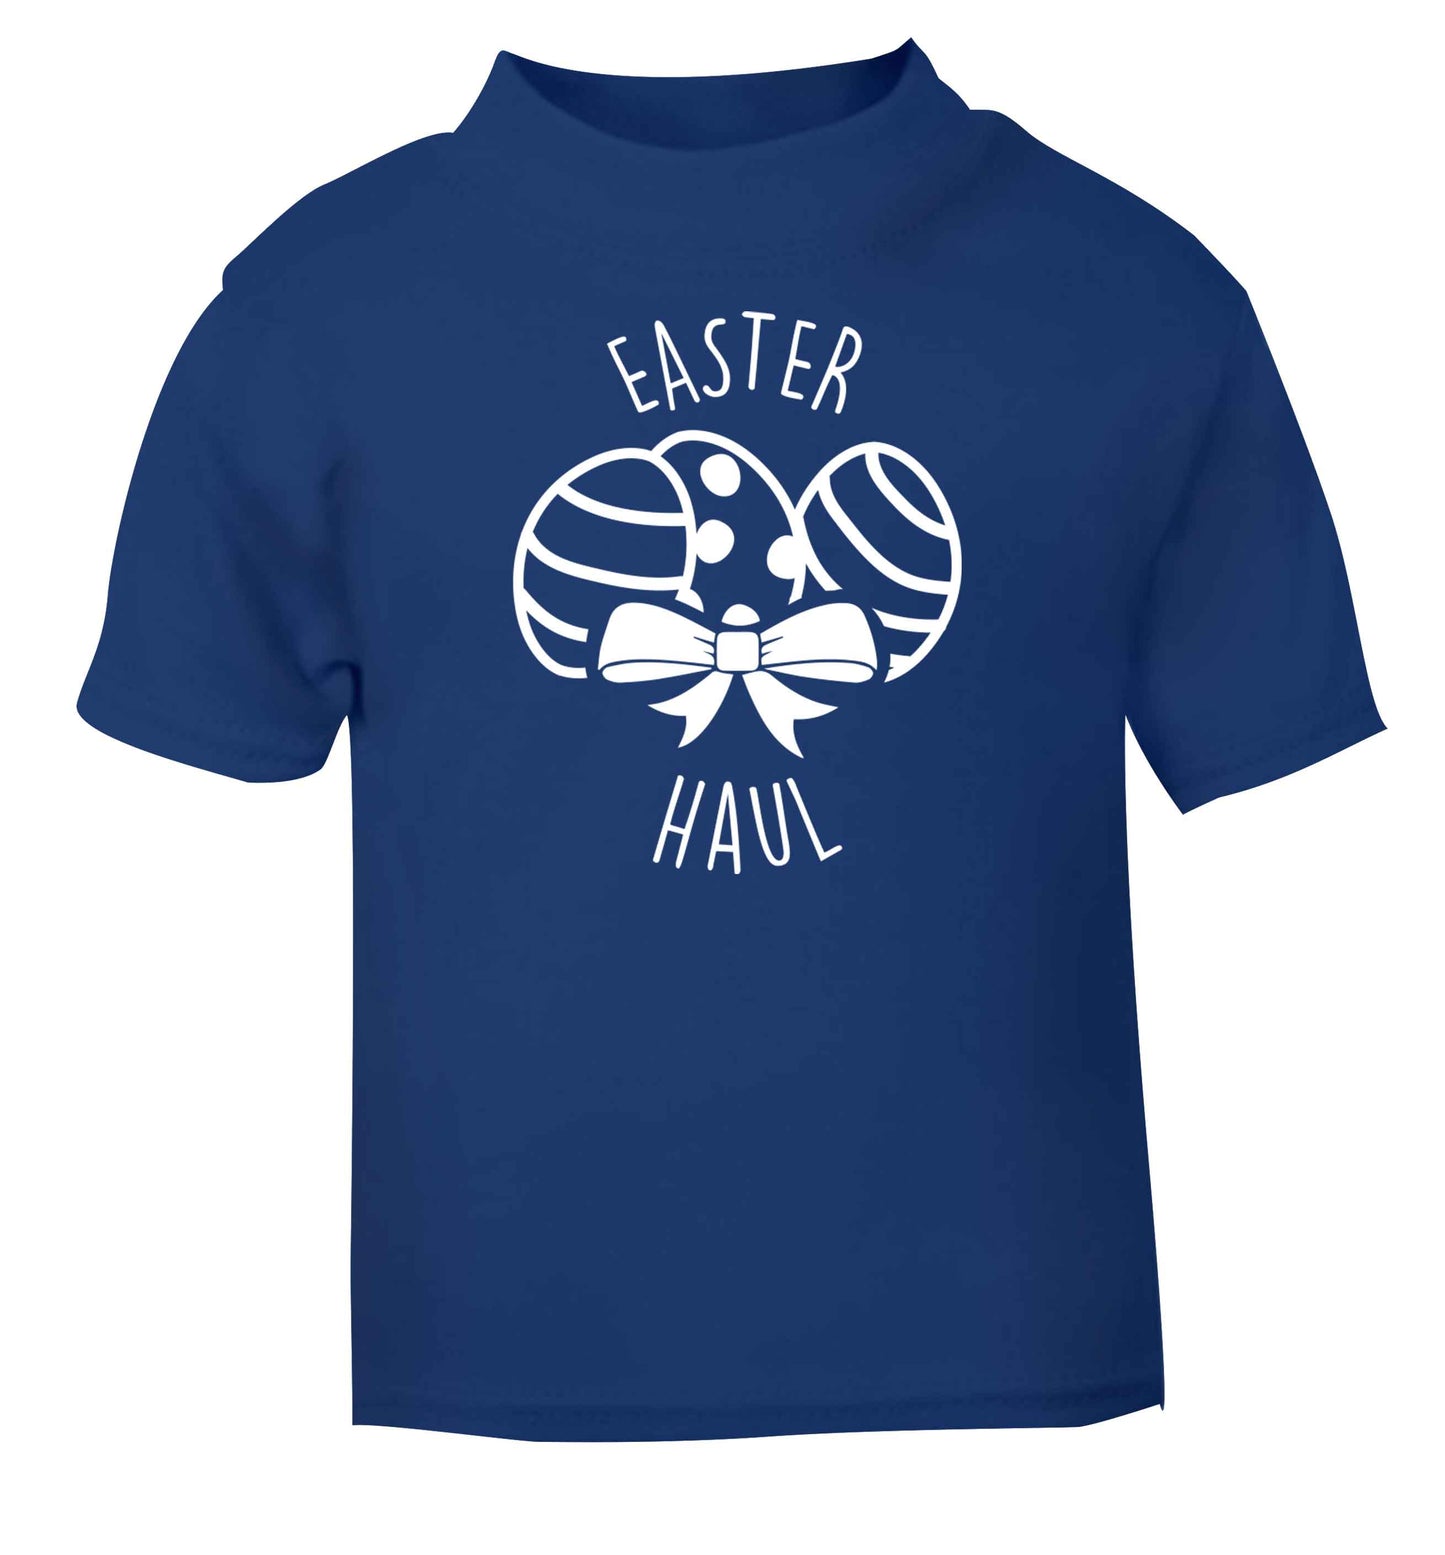 Easter haul blue baby toddler Tshirt 2 Years